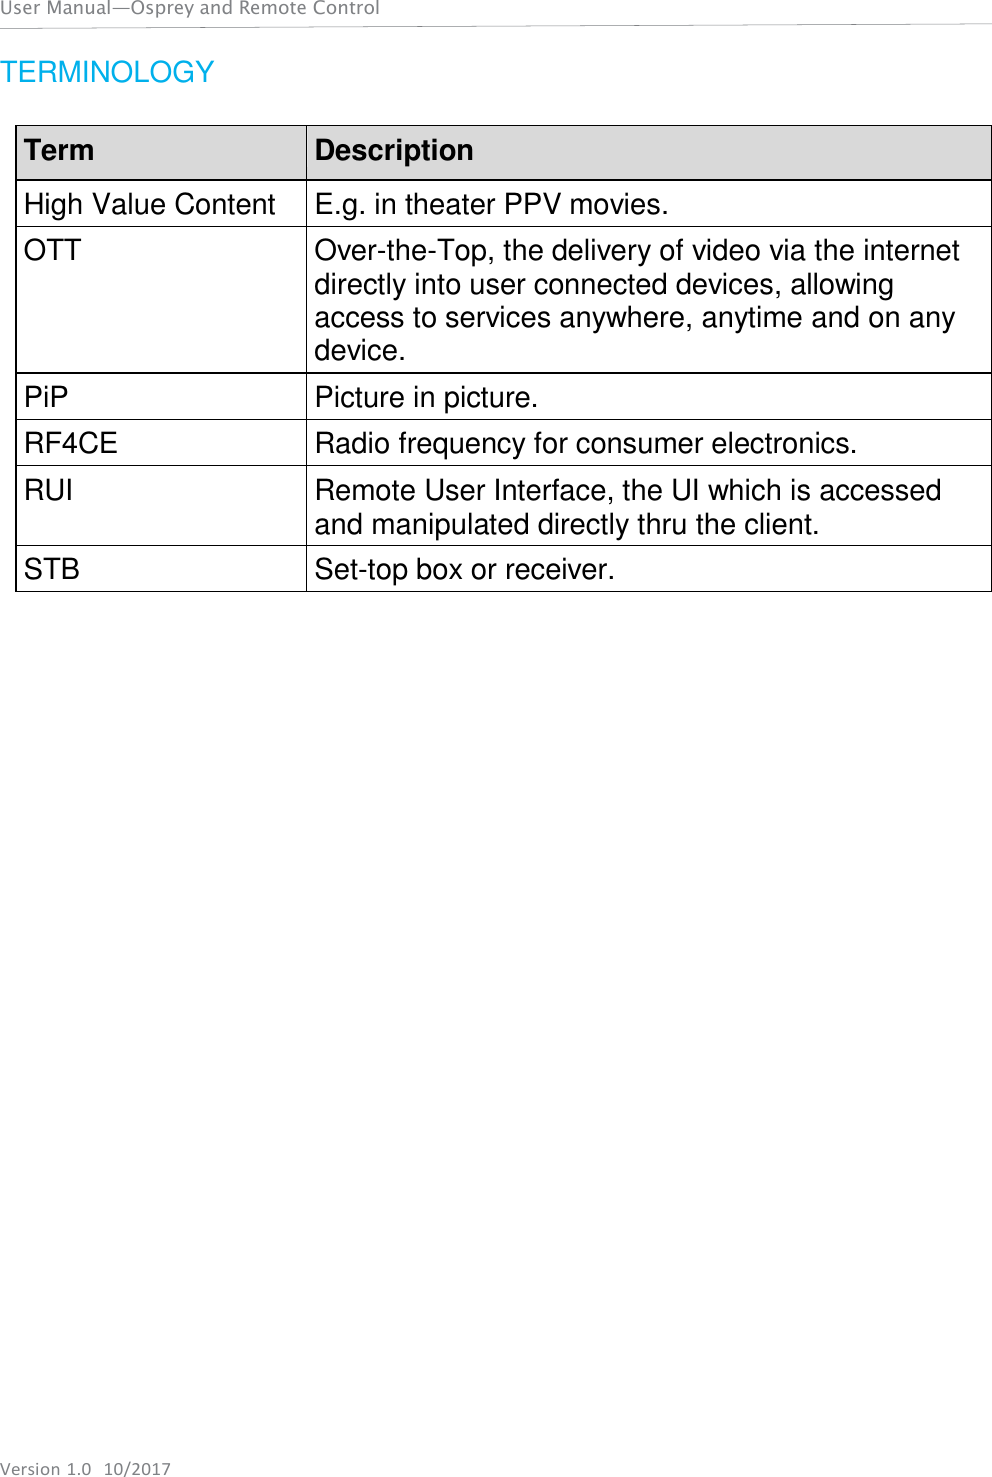 User Manual—Osprey and Remote Control Version 1.0  10/2017    TERMINOLOGY   Term Description High Value Content E.g. in theater PPV movies. OTT Over-the-Top, the delivery of video via the internet directly into user connected devices, allowing access to services anywhere, anytime and on any device. PiP Picture in picture. RF4CE Radio frequency for consumer electronics. RUI Remote User Interface, the UI which is accessed and manipulated directly thru the client. STB Set-top box or receiver. 